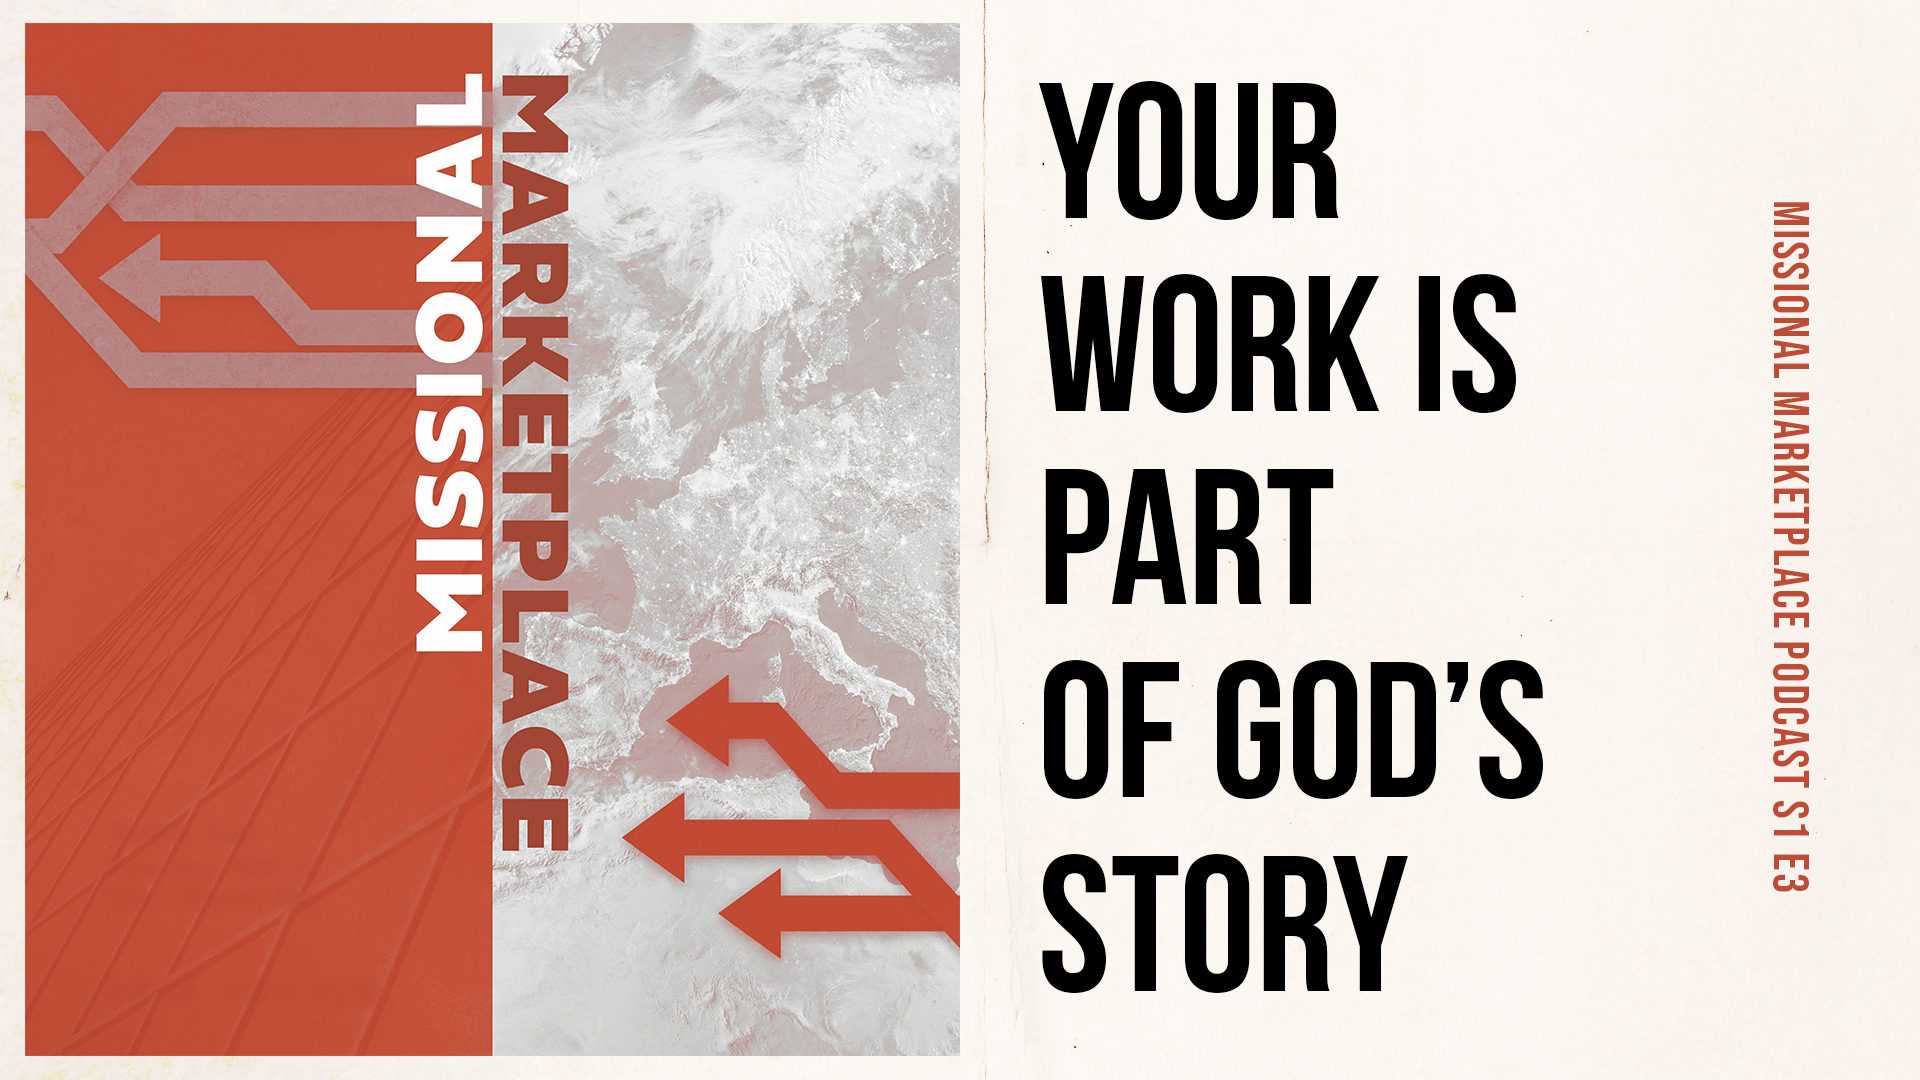 Your work is part of God's story